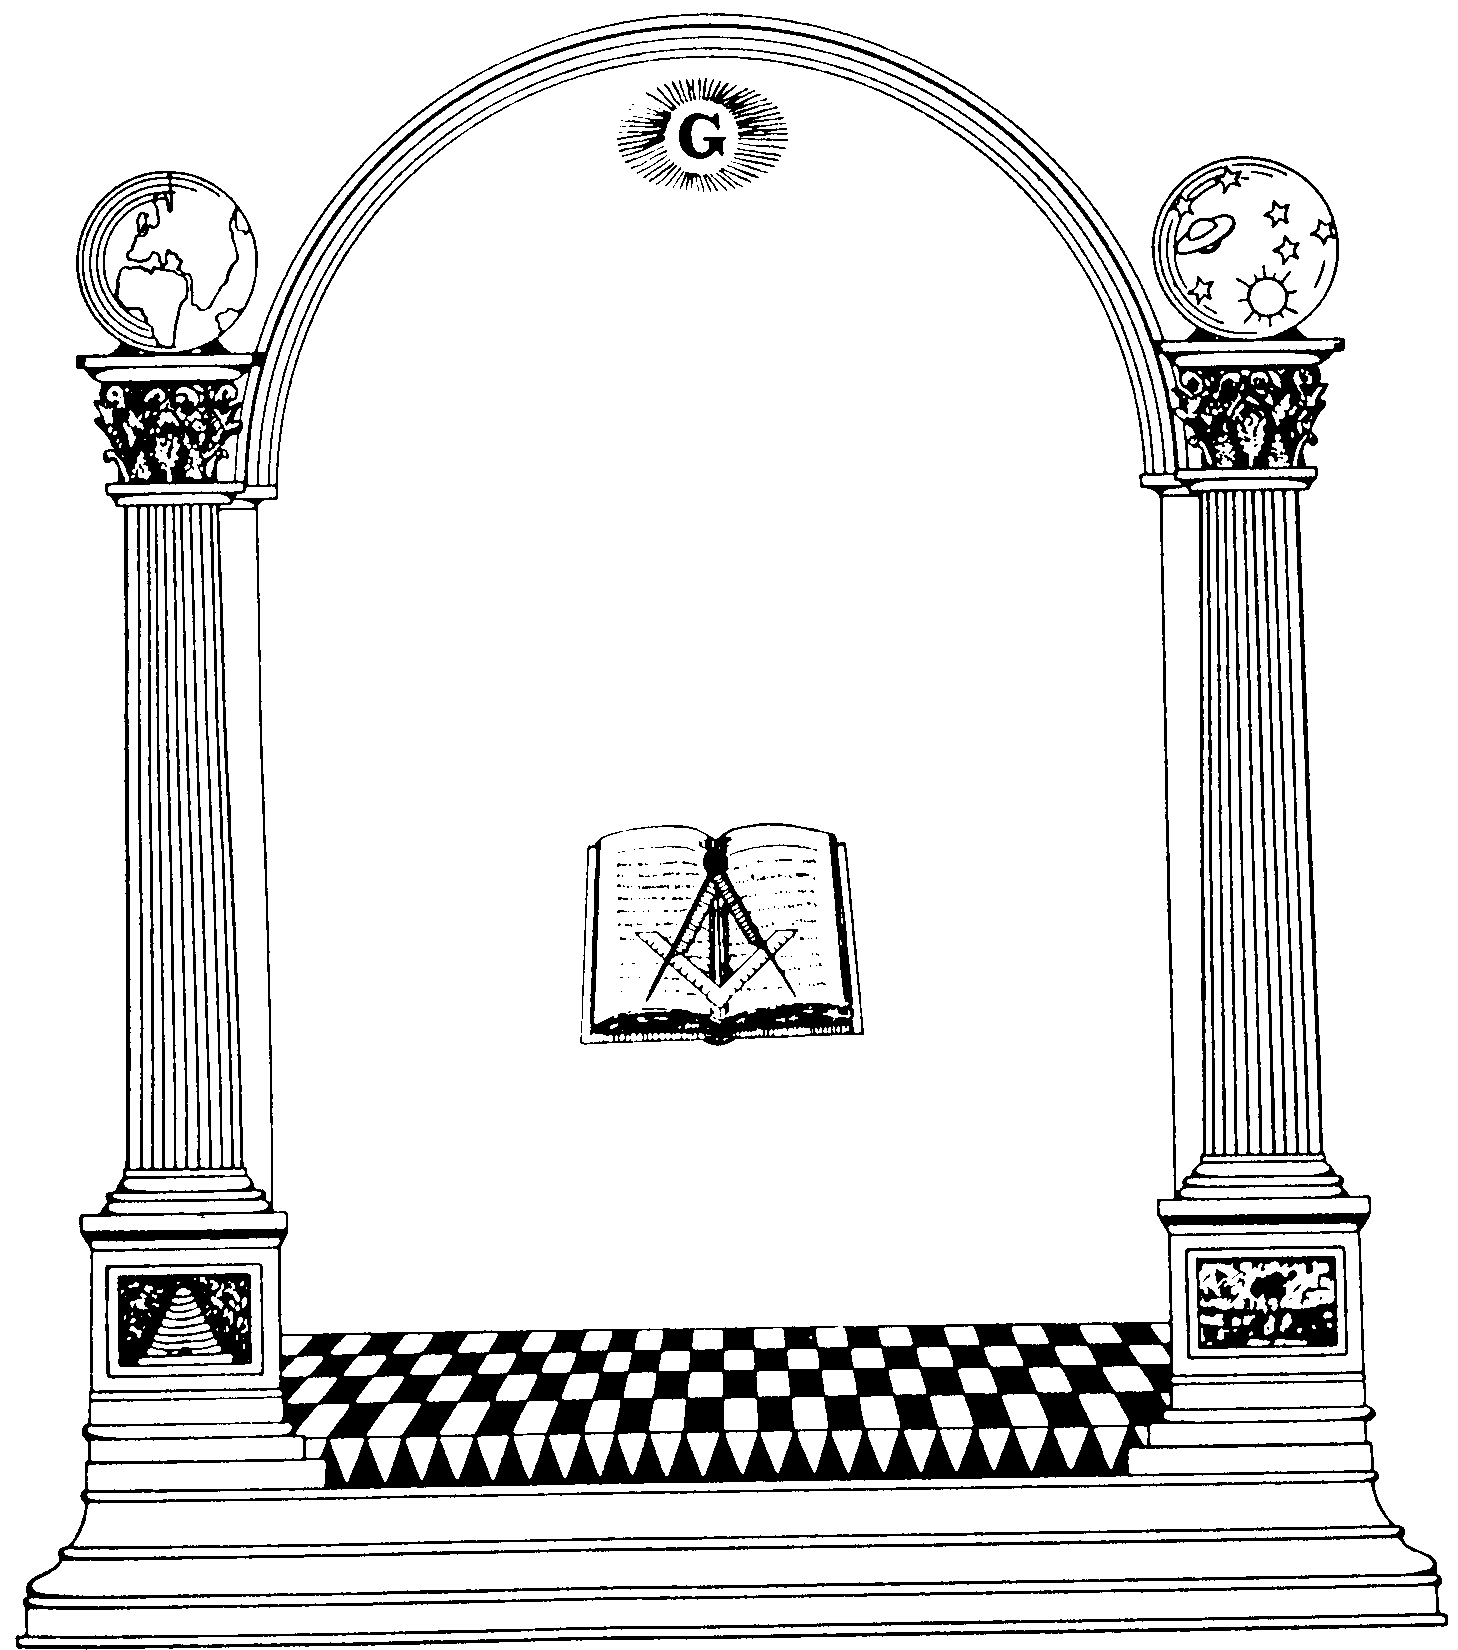 Masonic Clipart and Graphics: Blue Lodge